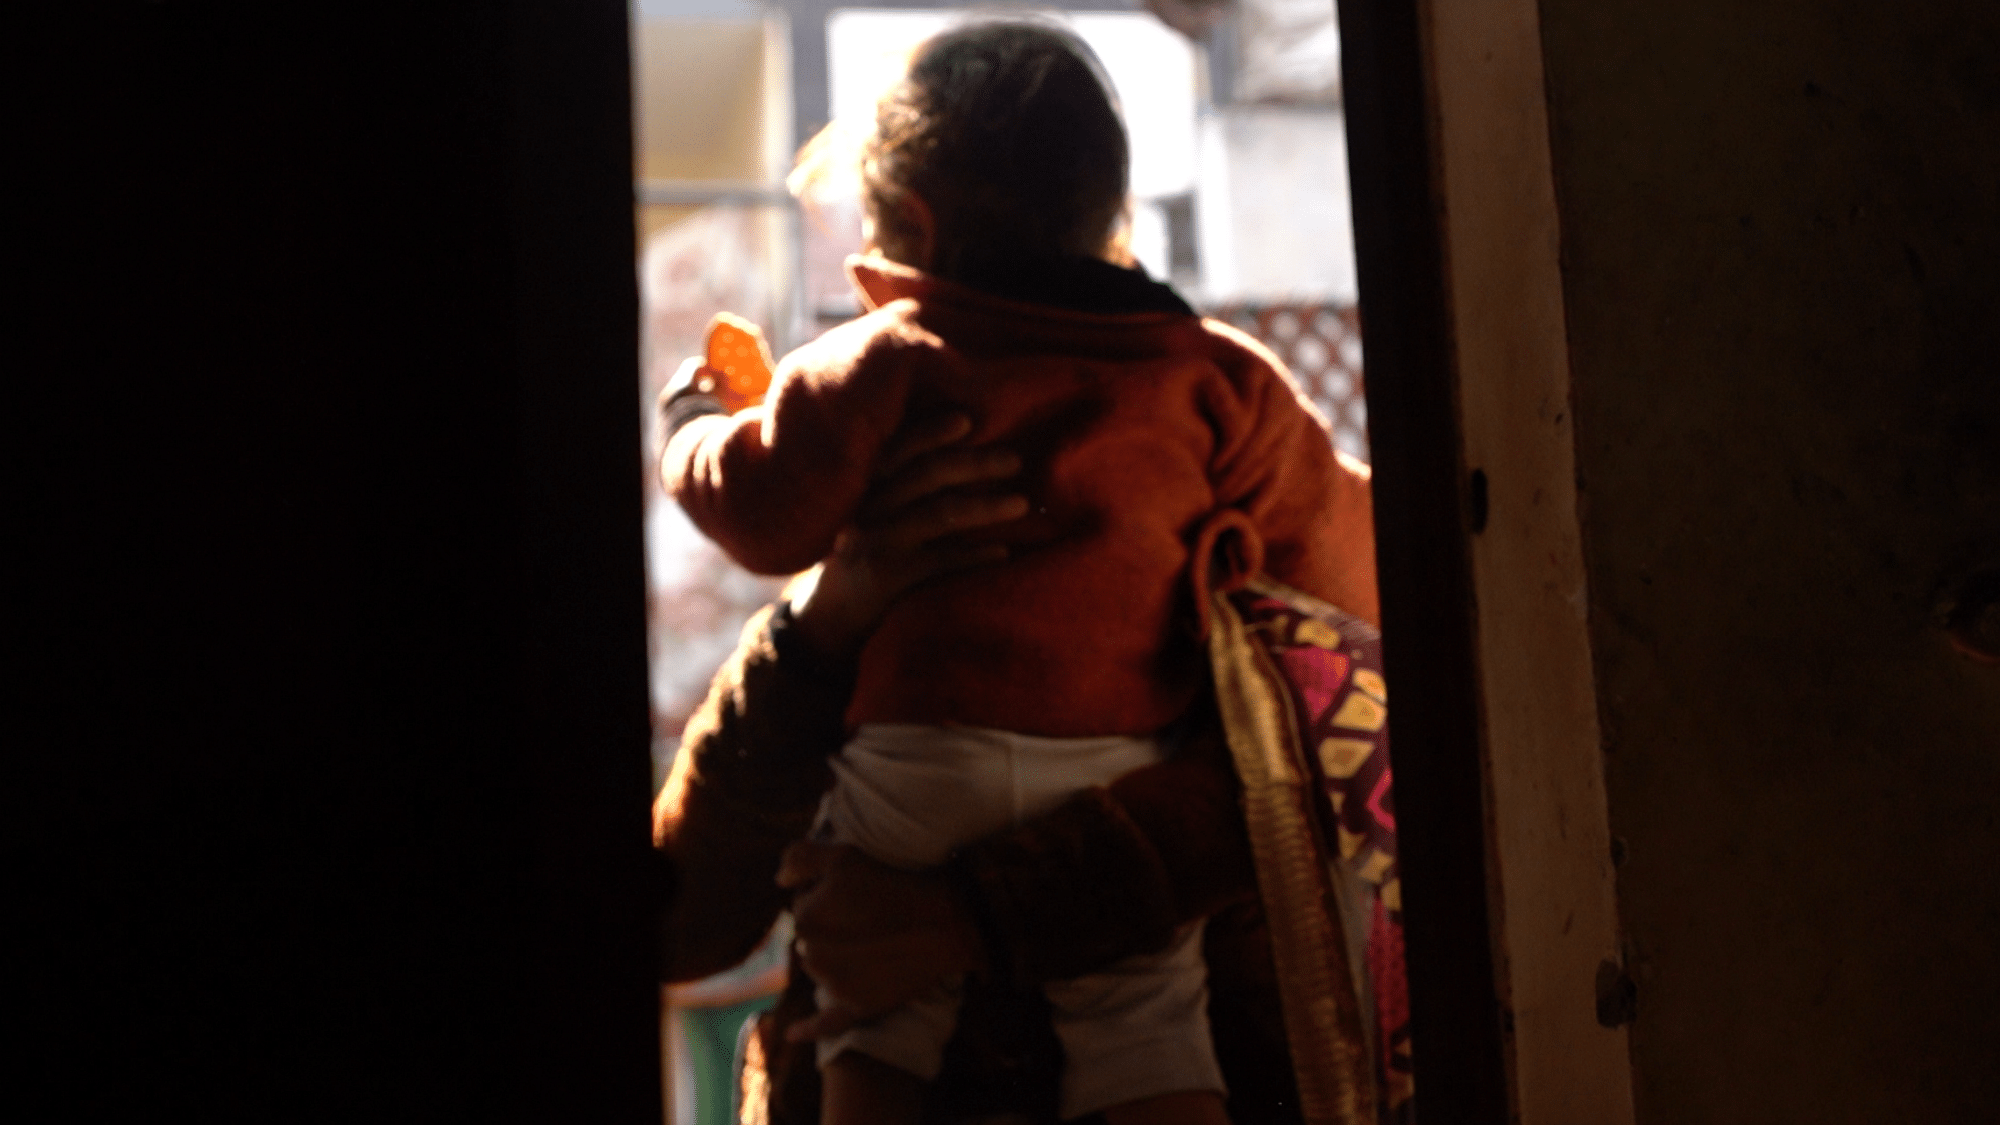 Chhutki was just 8 months old when she was raped last year.